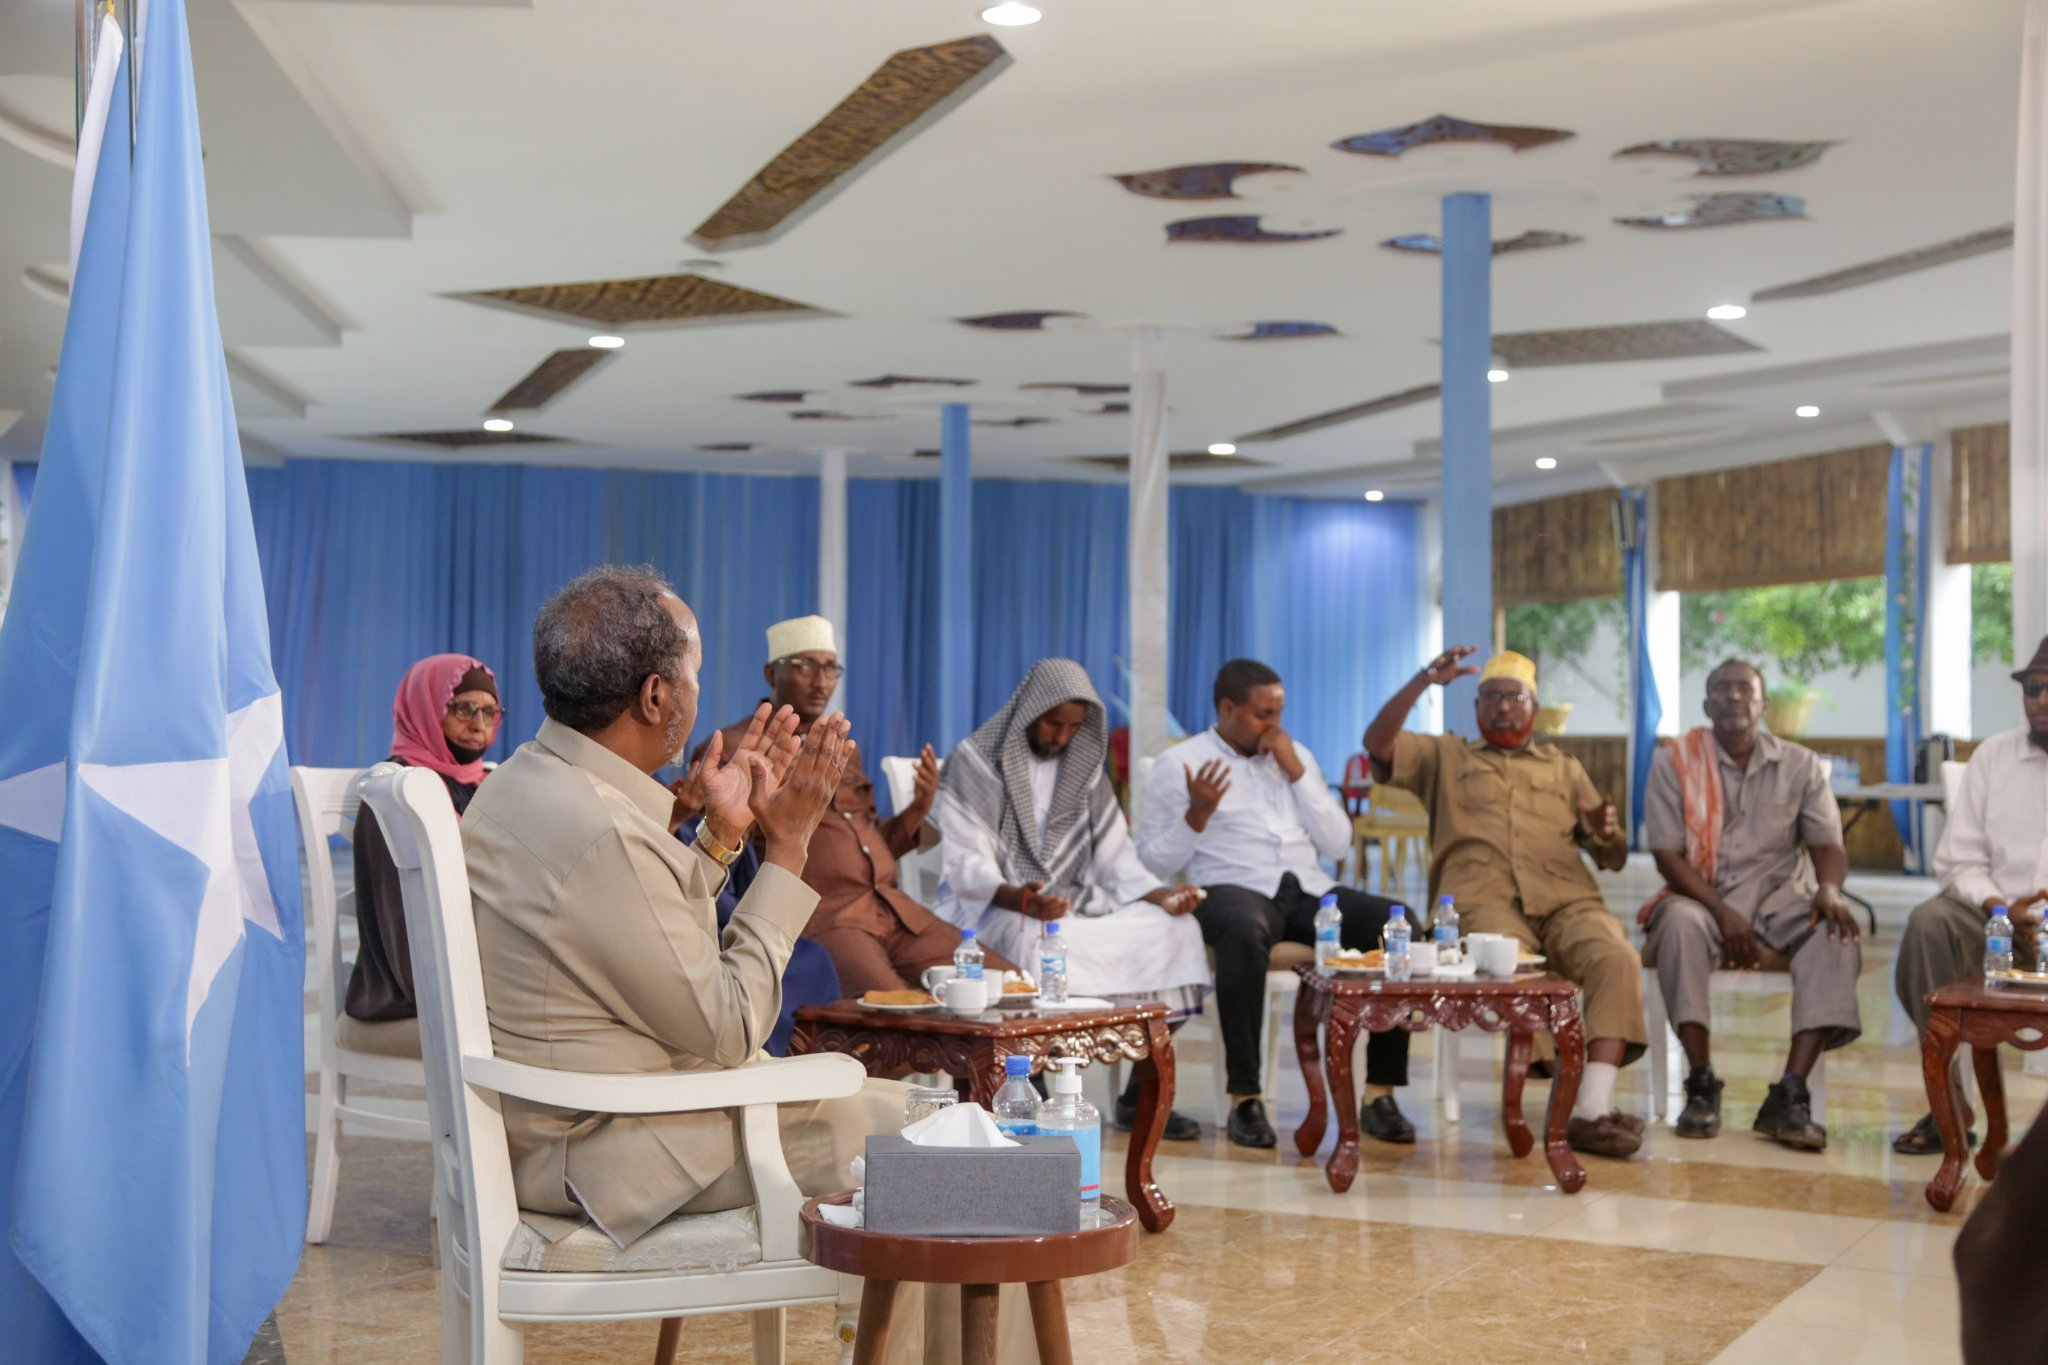 President Hassan meets with parents of controversial army